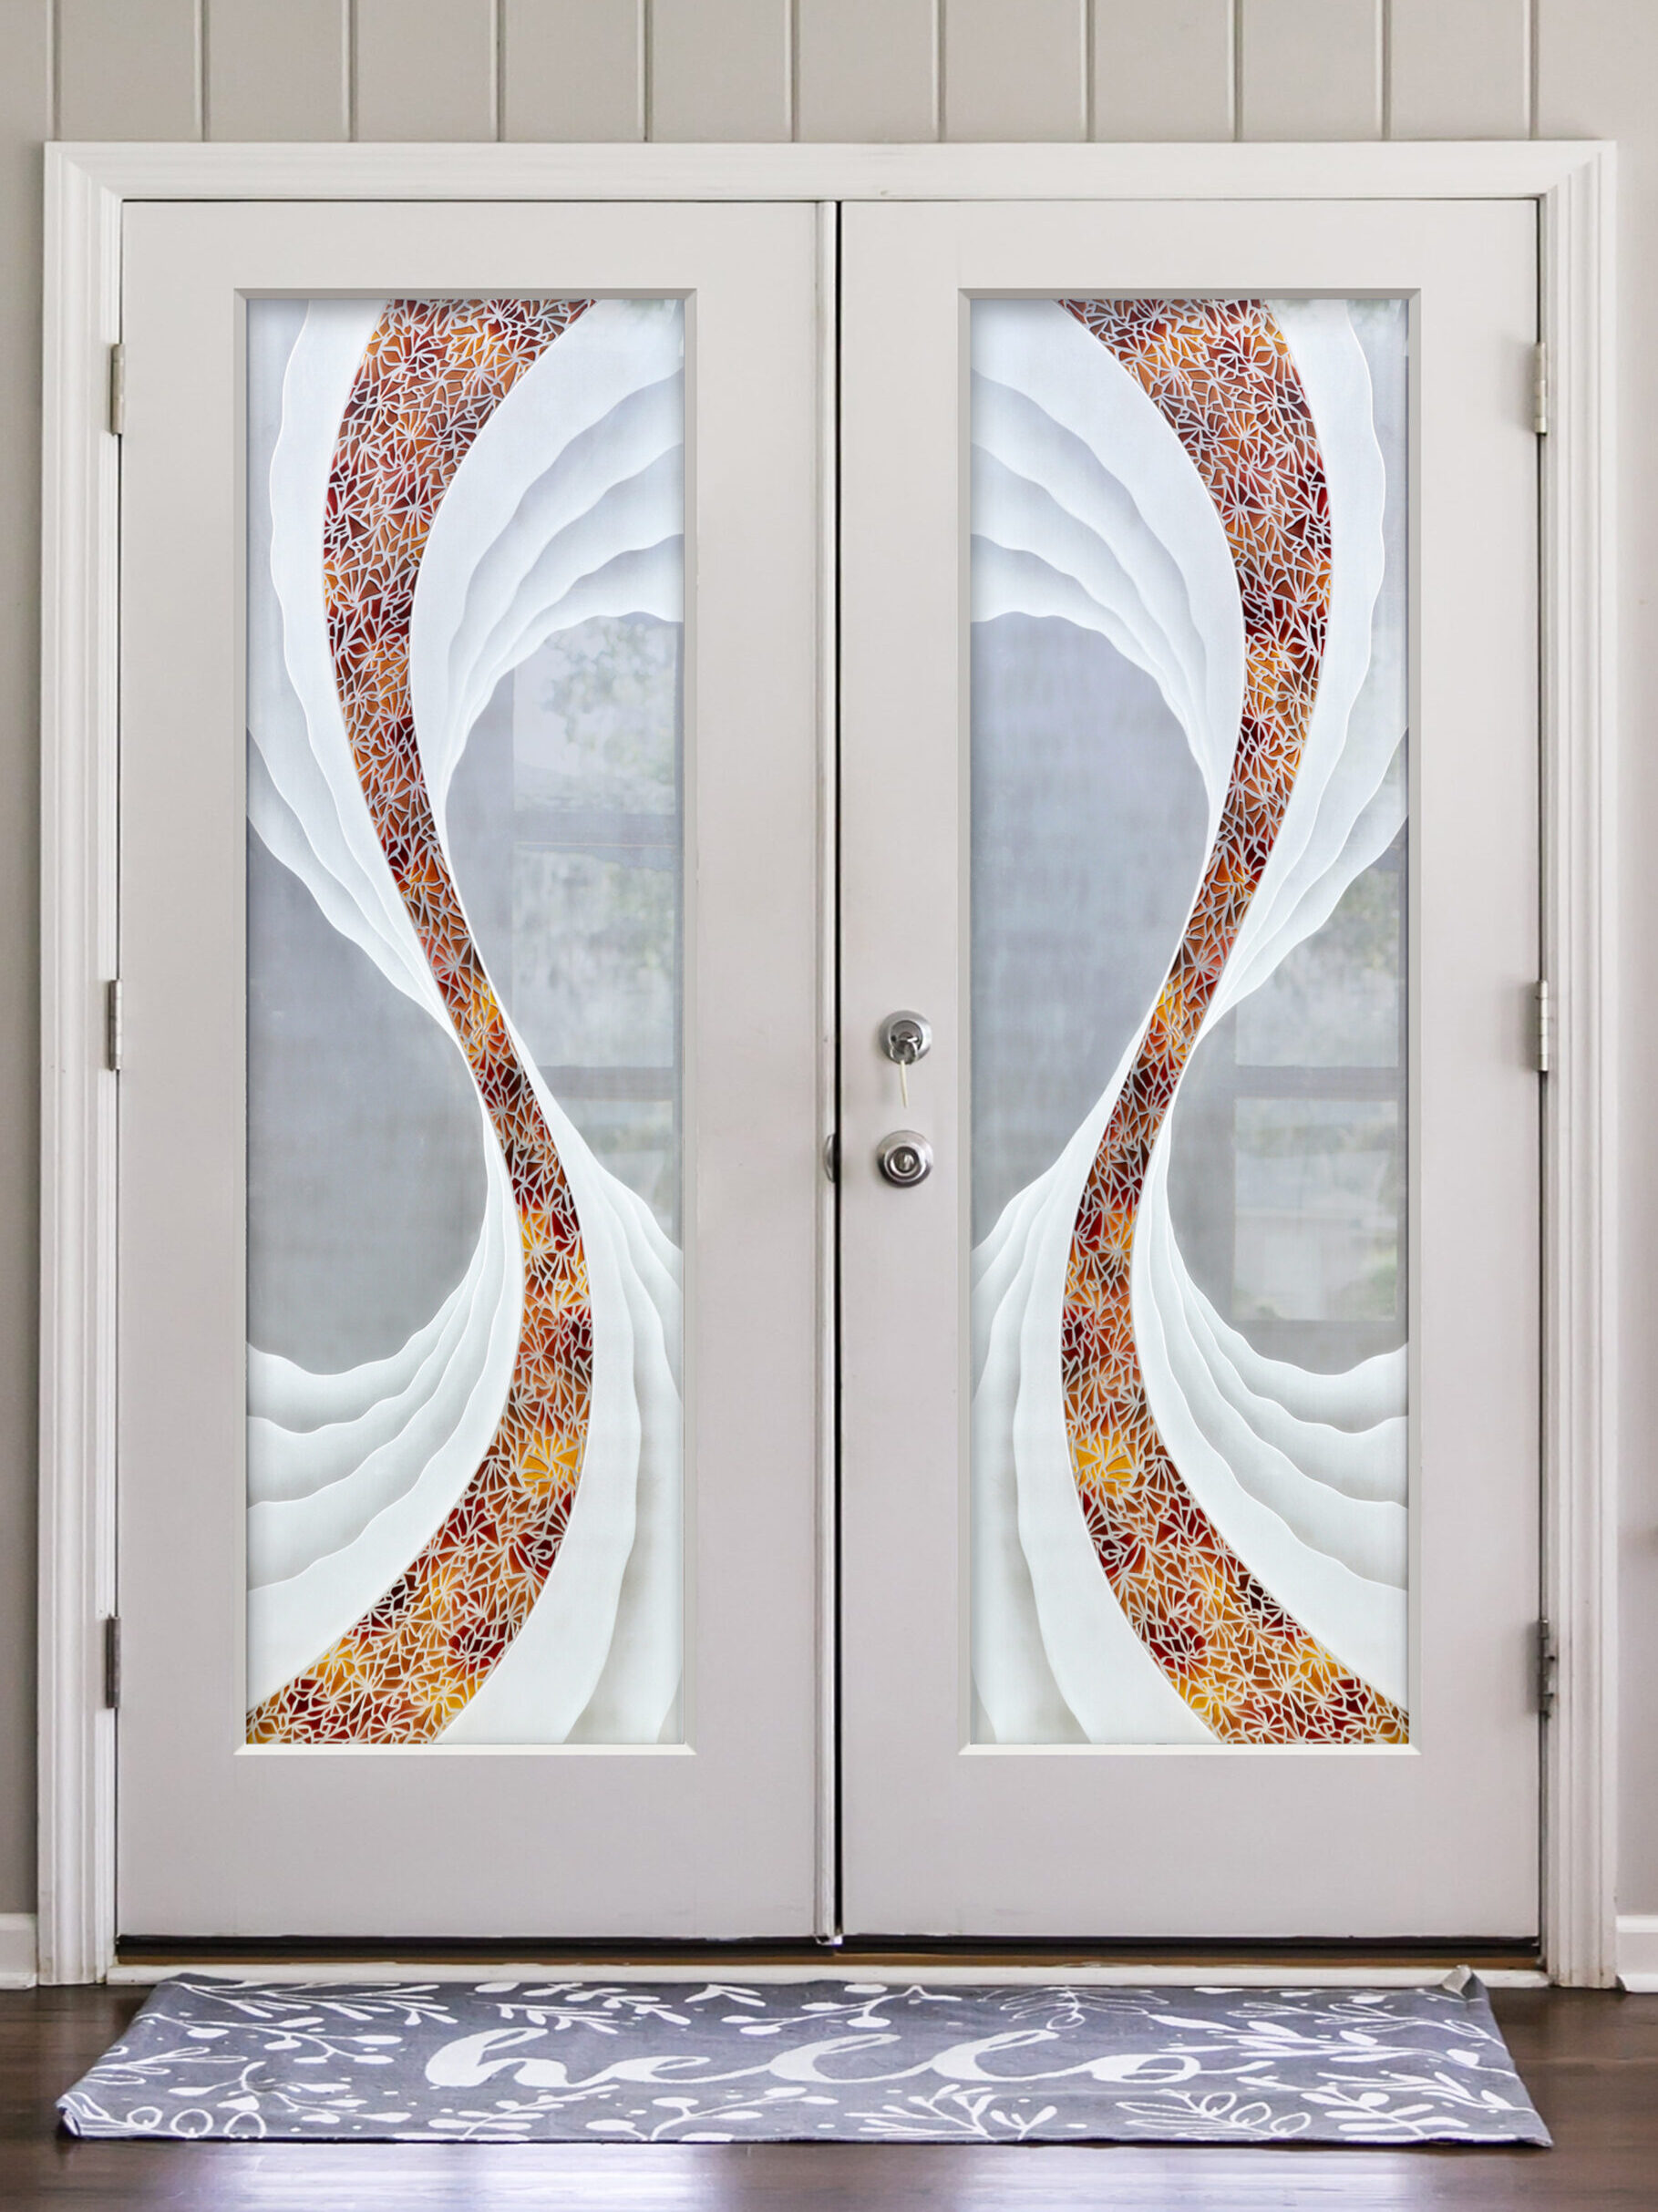 Cyclone Private 3D Enhanced Painted Private Frosted Glass Finish Frosted Interior Glass Doors Modern Decor Sans Soucie